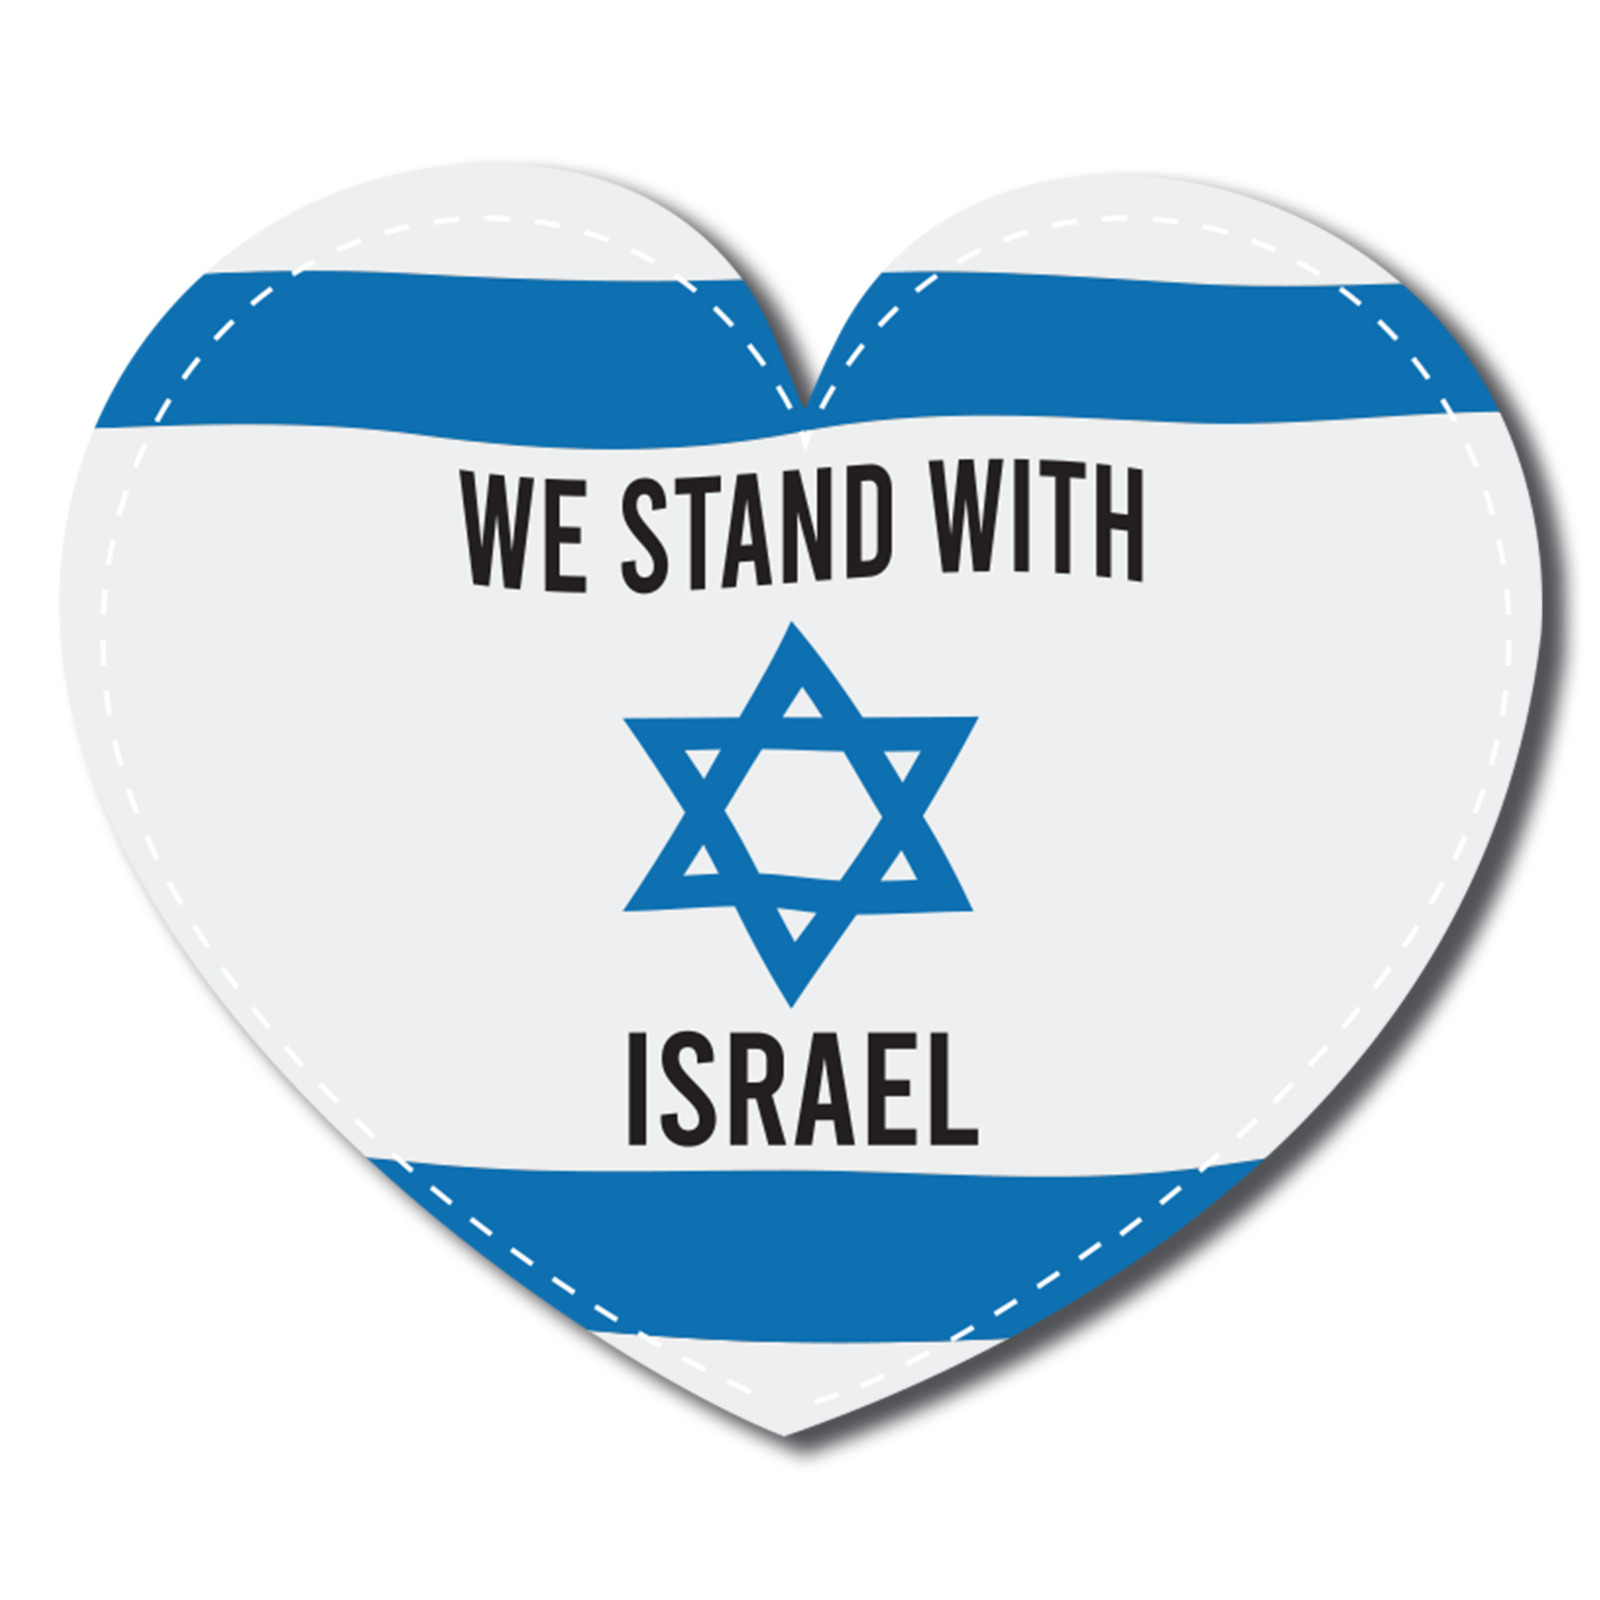 We Stand With Israel, Israeli Support Flag Heart Magnet, 5x4 inches, Automotive